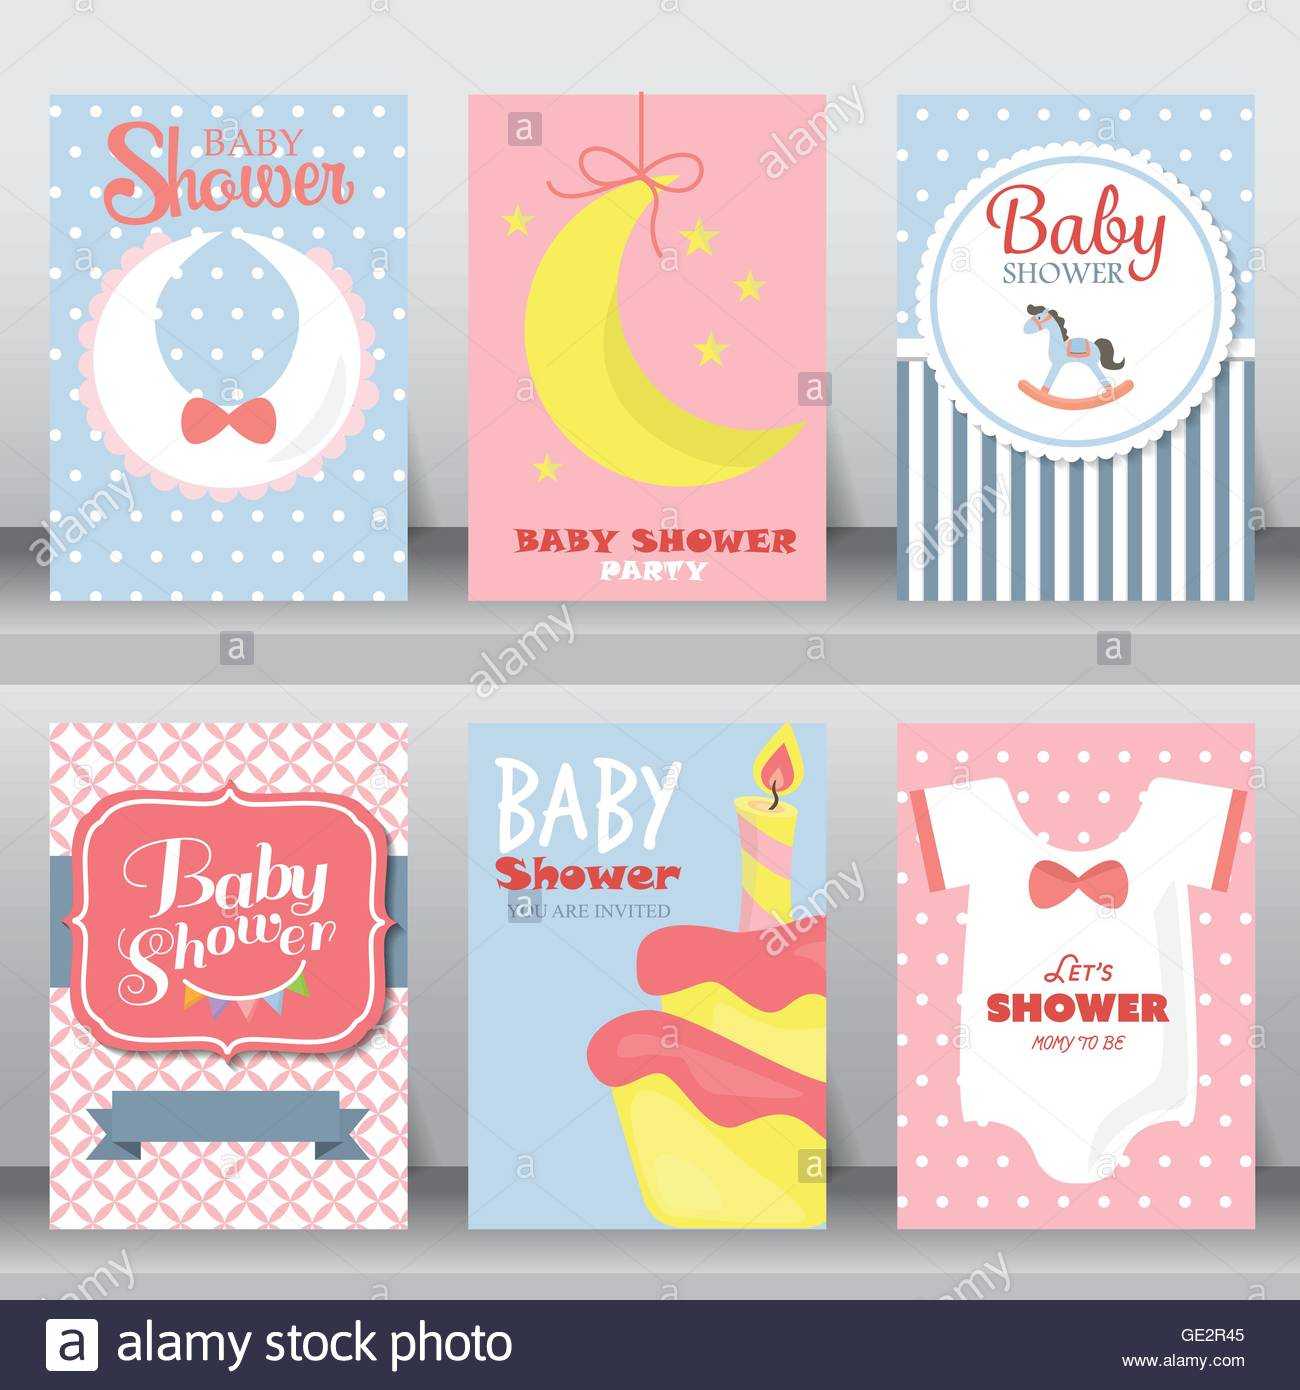 Baby Shower Party Greeting And Invitation Card. Layout For Greeting Card Layout Templates